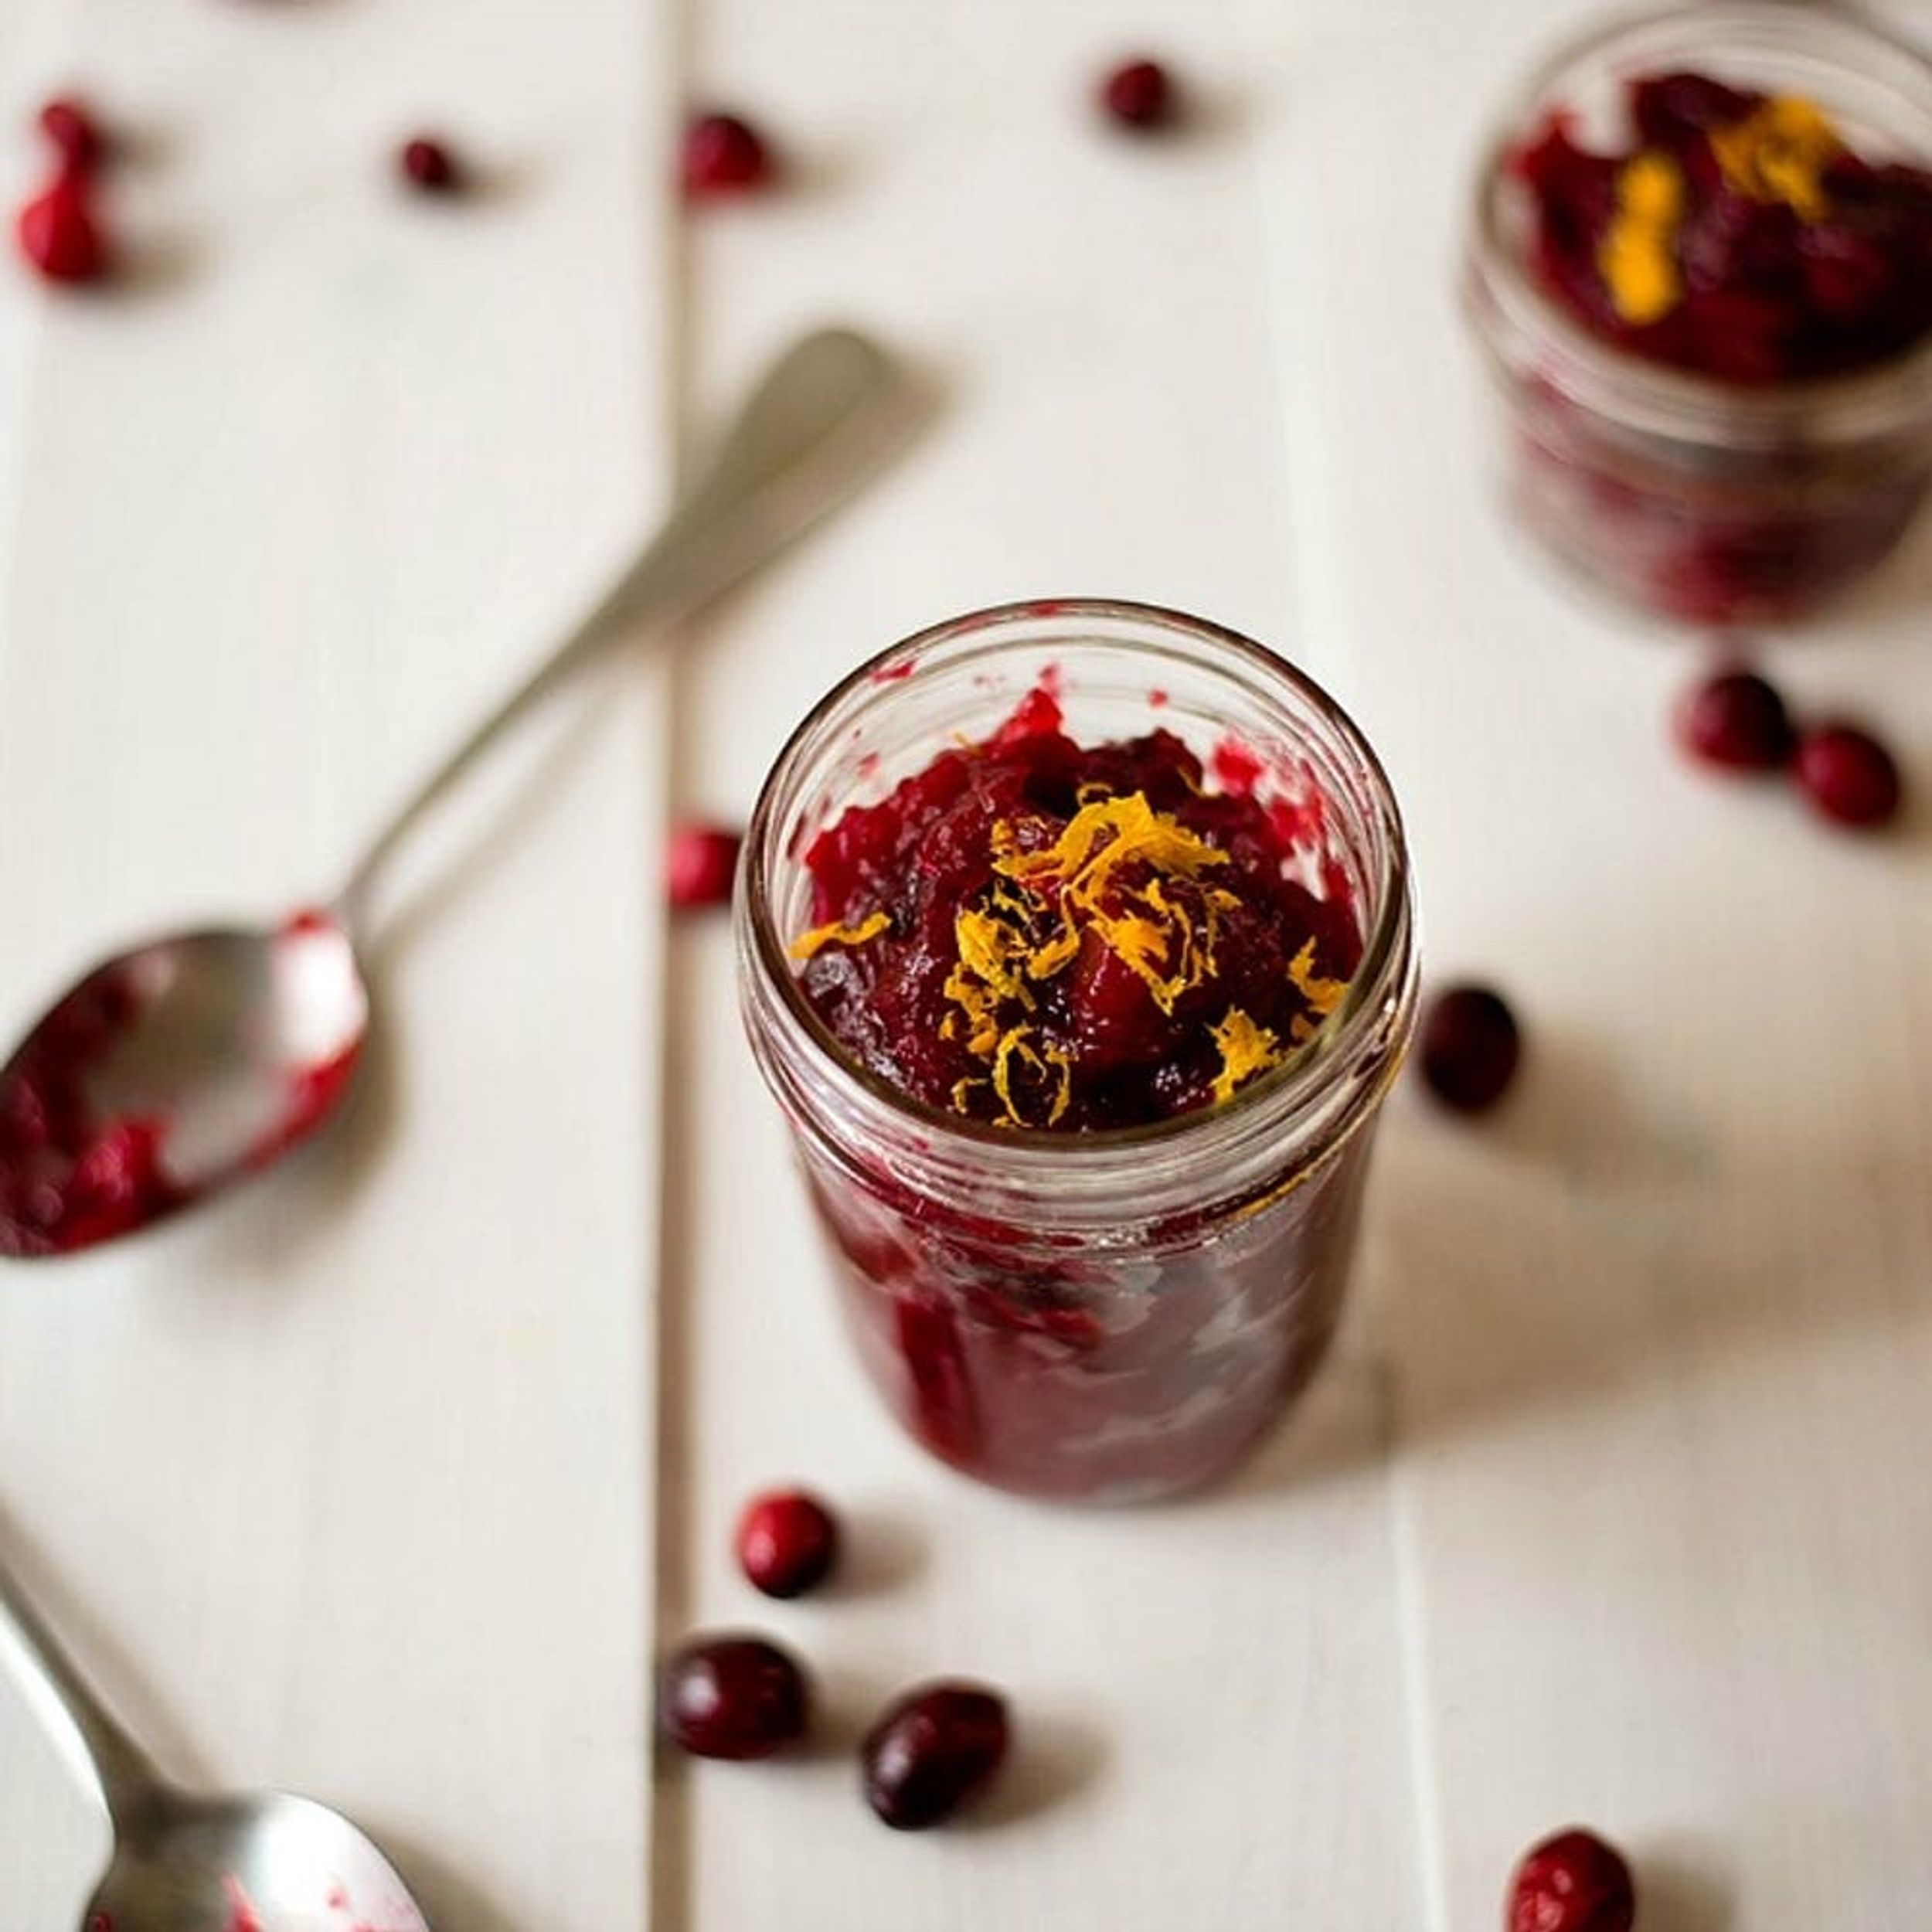 11 Delish Cranberry Sauce Recipes That Are Totally Our Jam